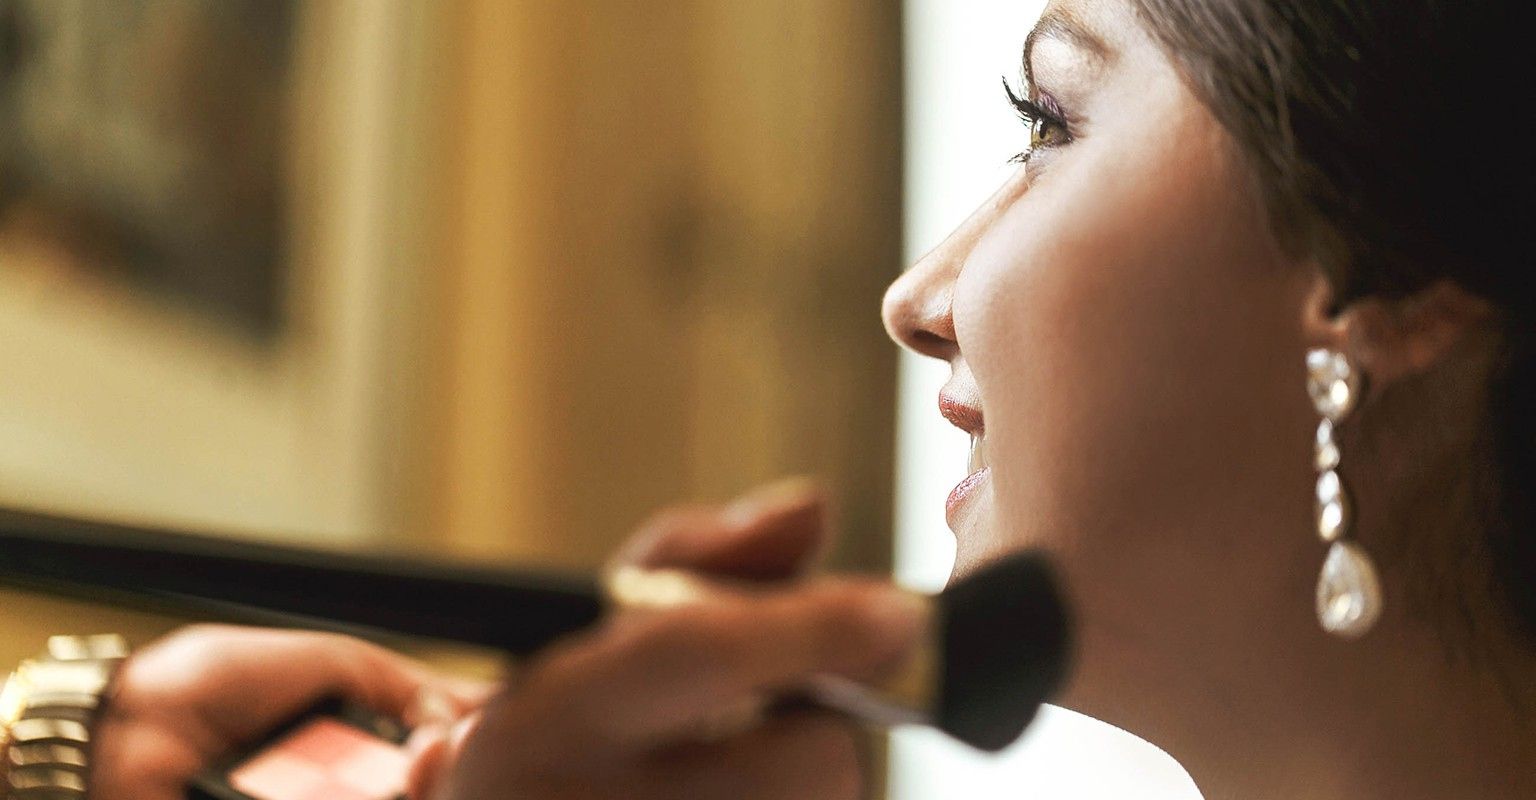 The 10 Best Hair And Makeup Artists Near Me (with Free